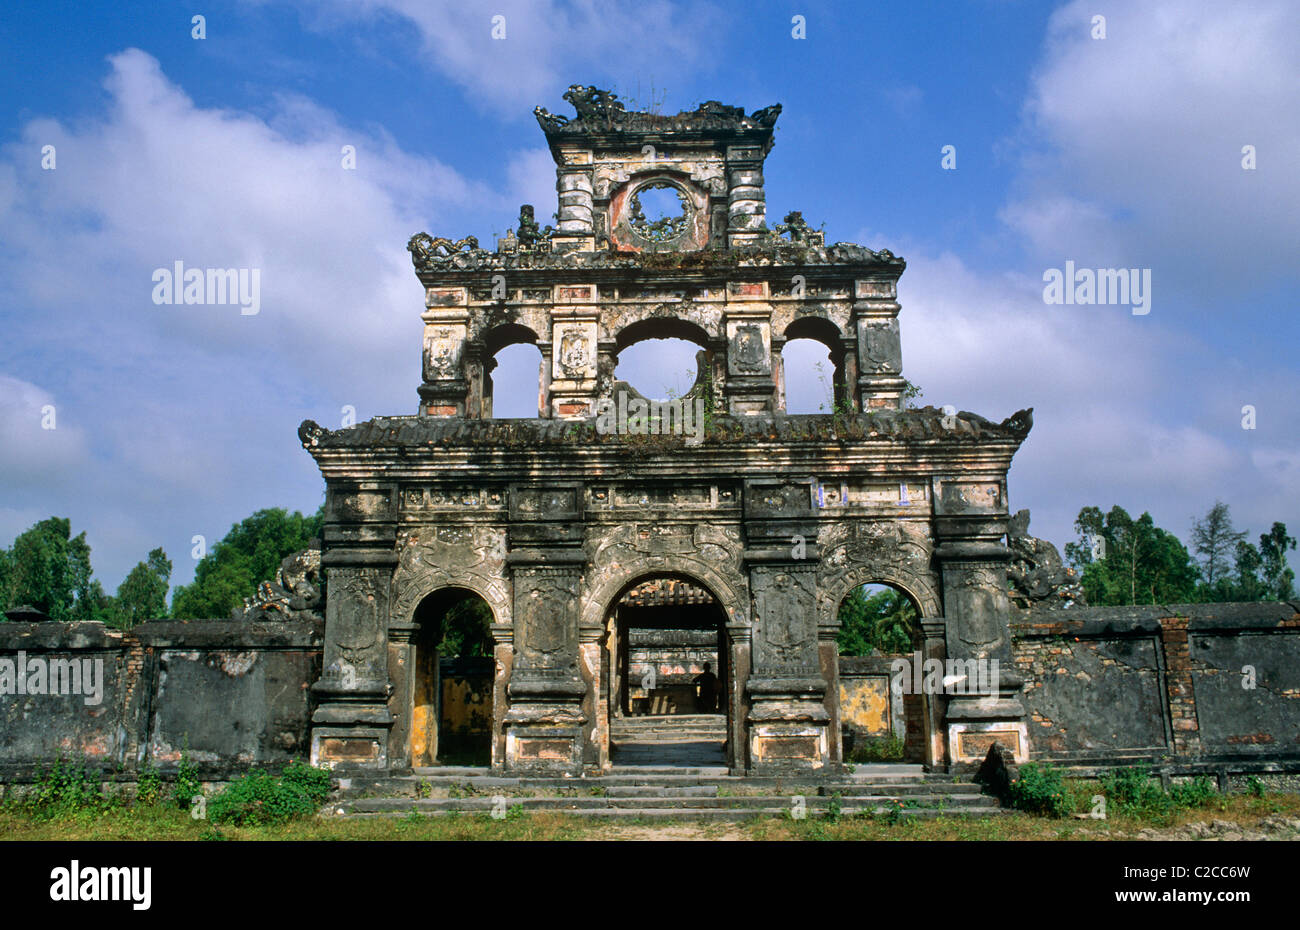 Facade of building, Tomb of Dong Khanh, Hue, Thua Thien Hue Province, Vietnam, Asia Stock Photo